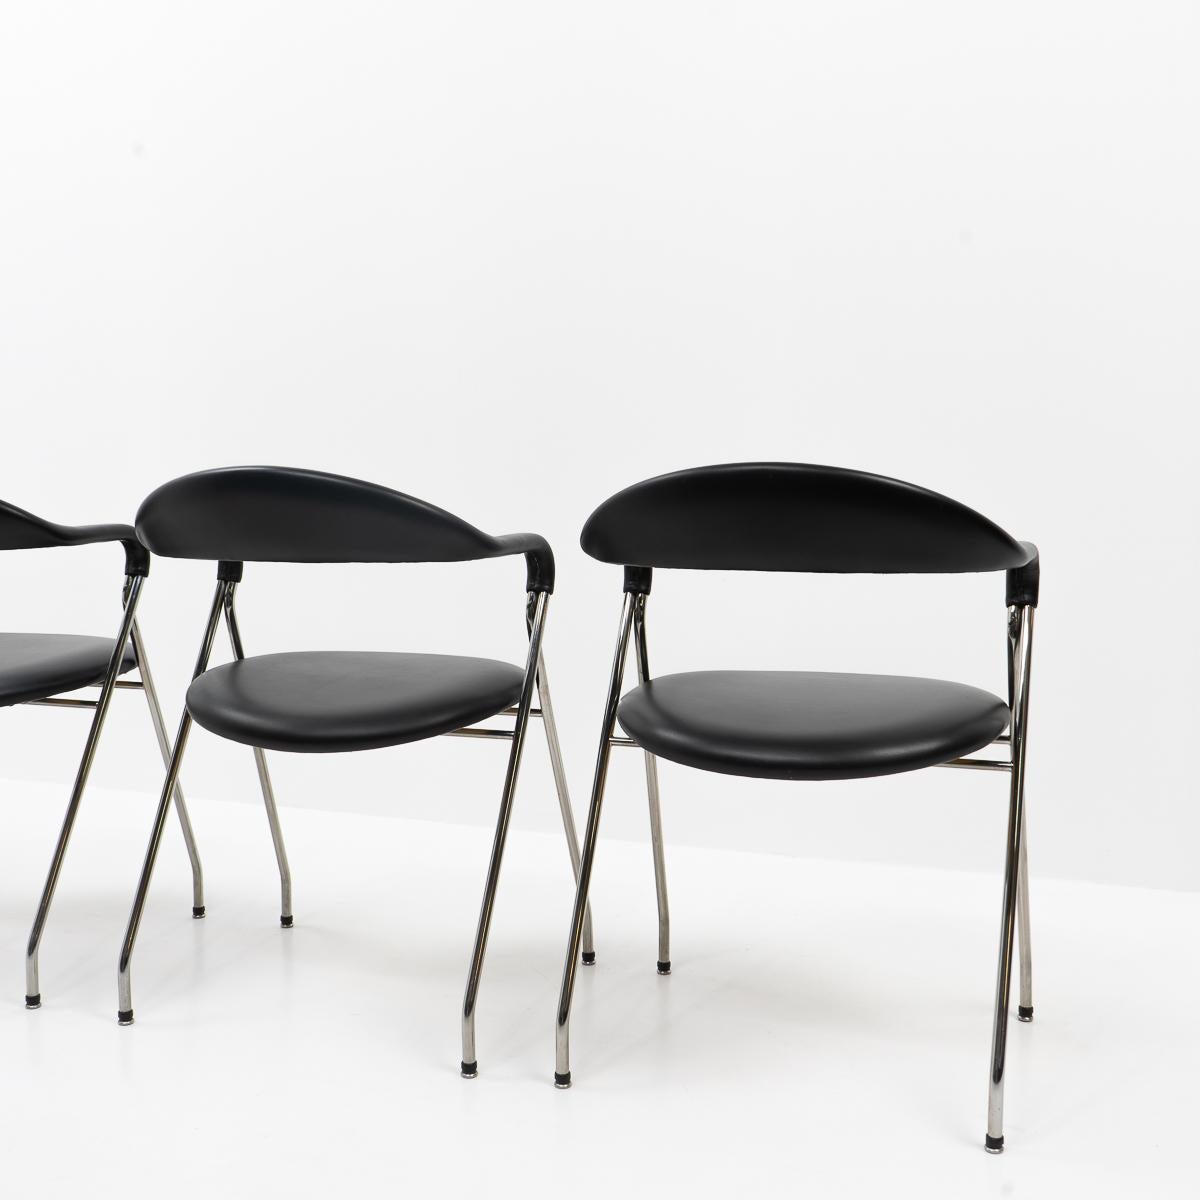 Late 20th Century Swiss Design Classic Hans Eichenberger Saffa Chairs, Set of Four, 1980s For Sale